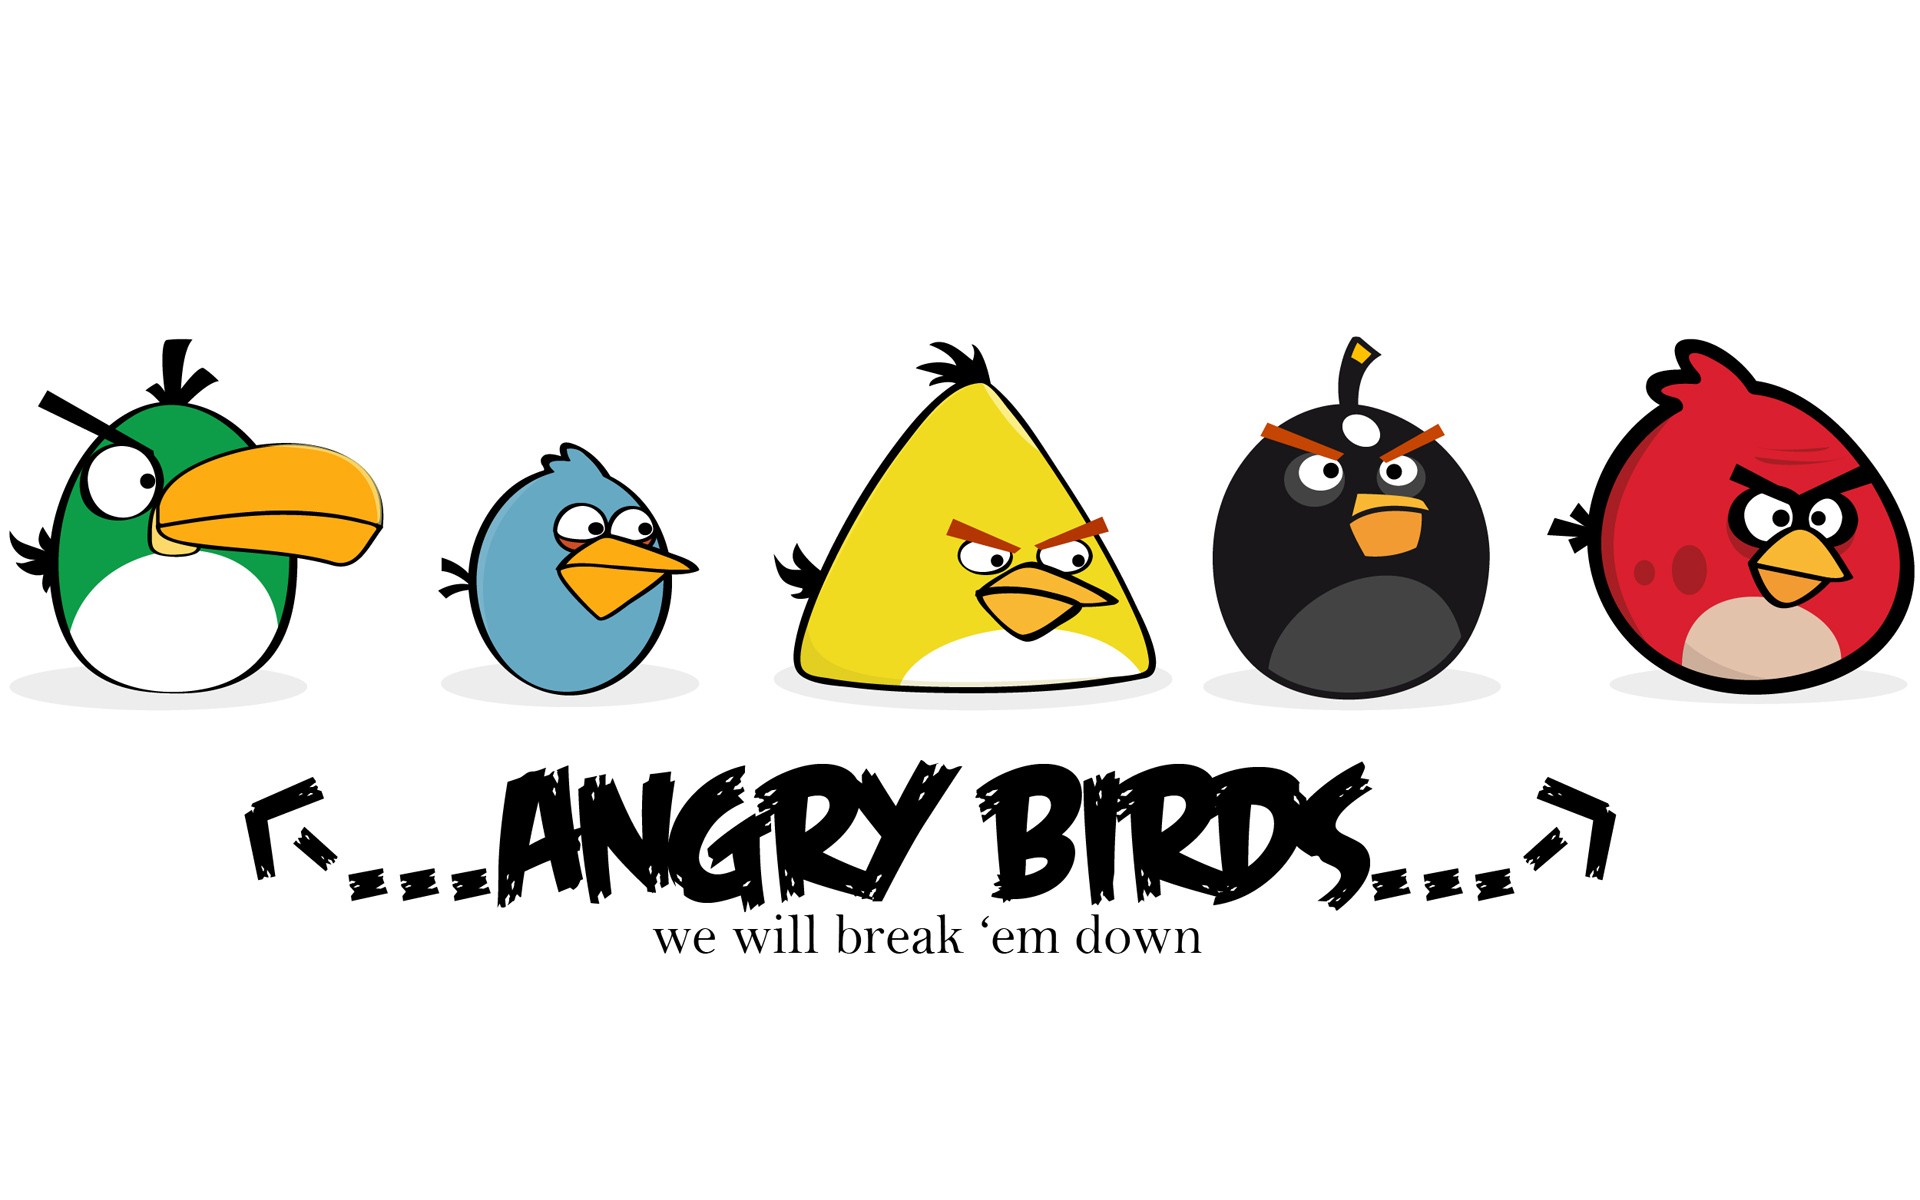 Angry Birds Game Wallpapers #2 - 1920x1200